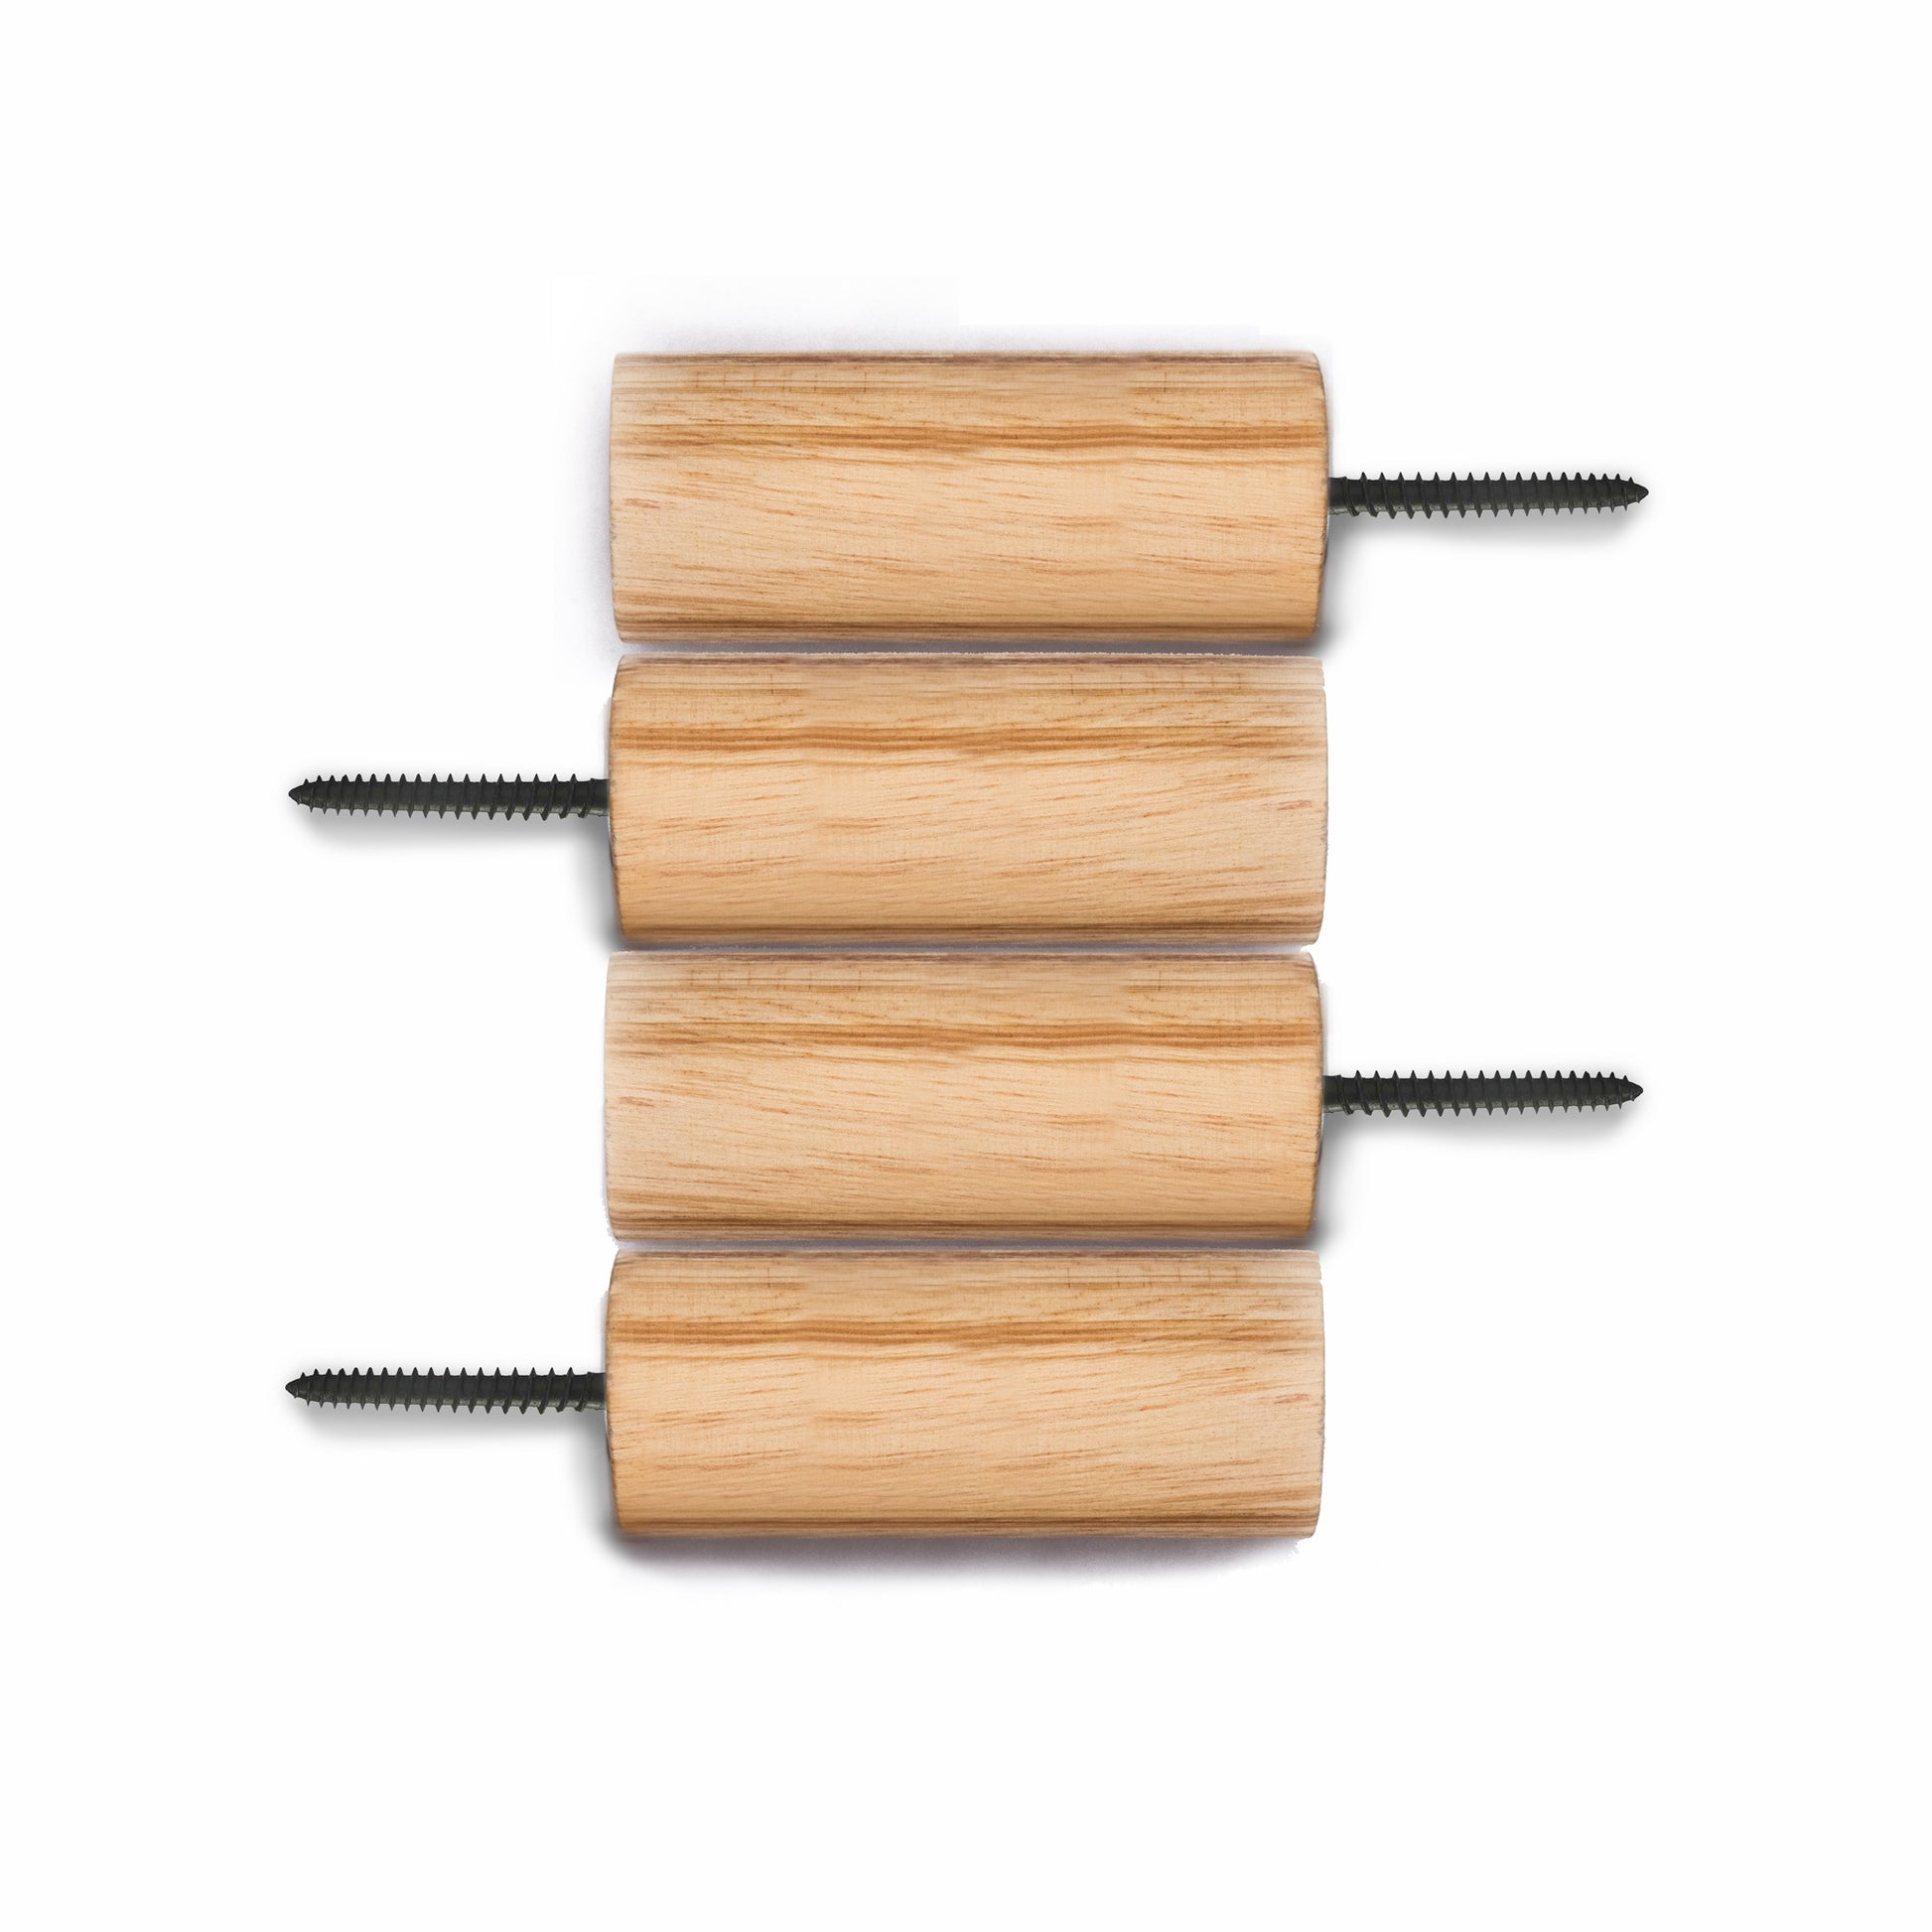 Wooden Wall Hooks (Set of 4) - Ankā Supply Co